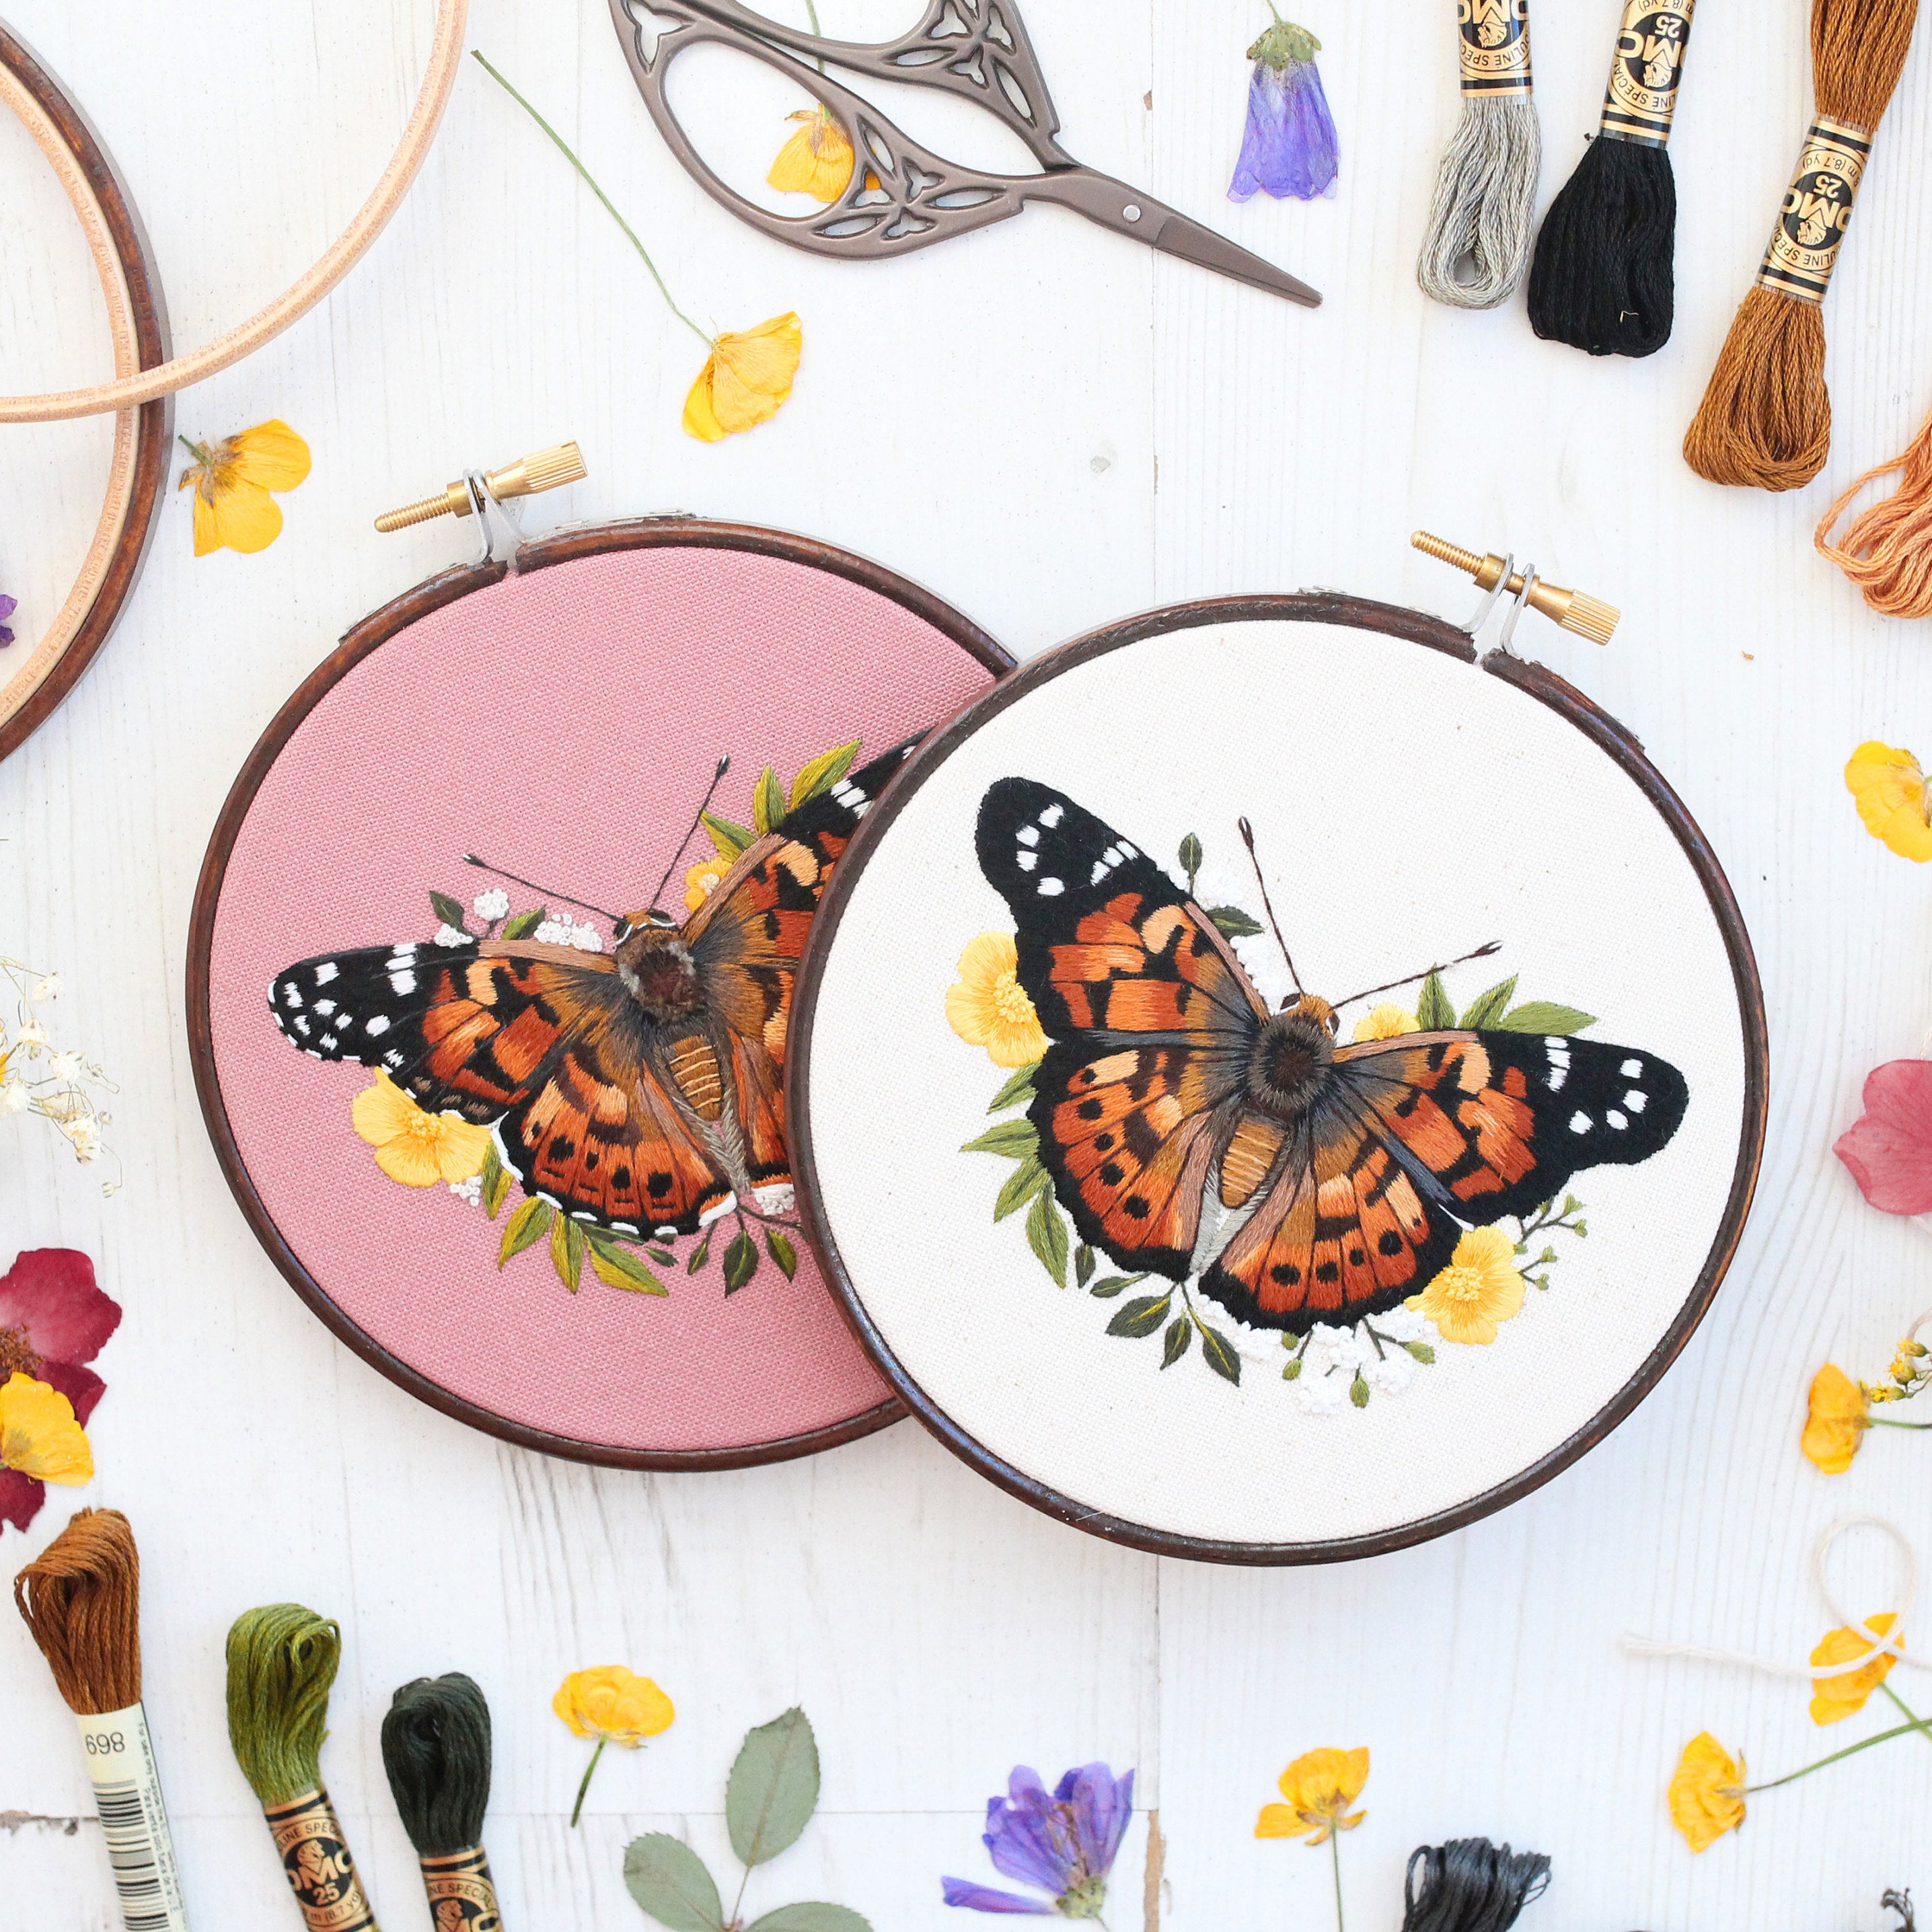 Modern hand embroidery patterns by Emilie Ferris